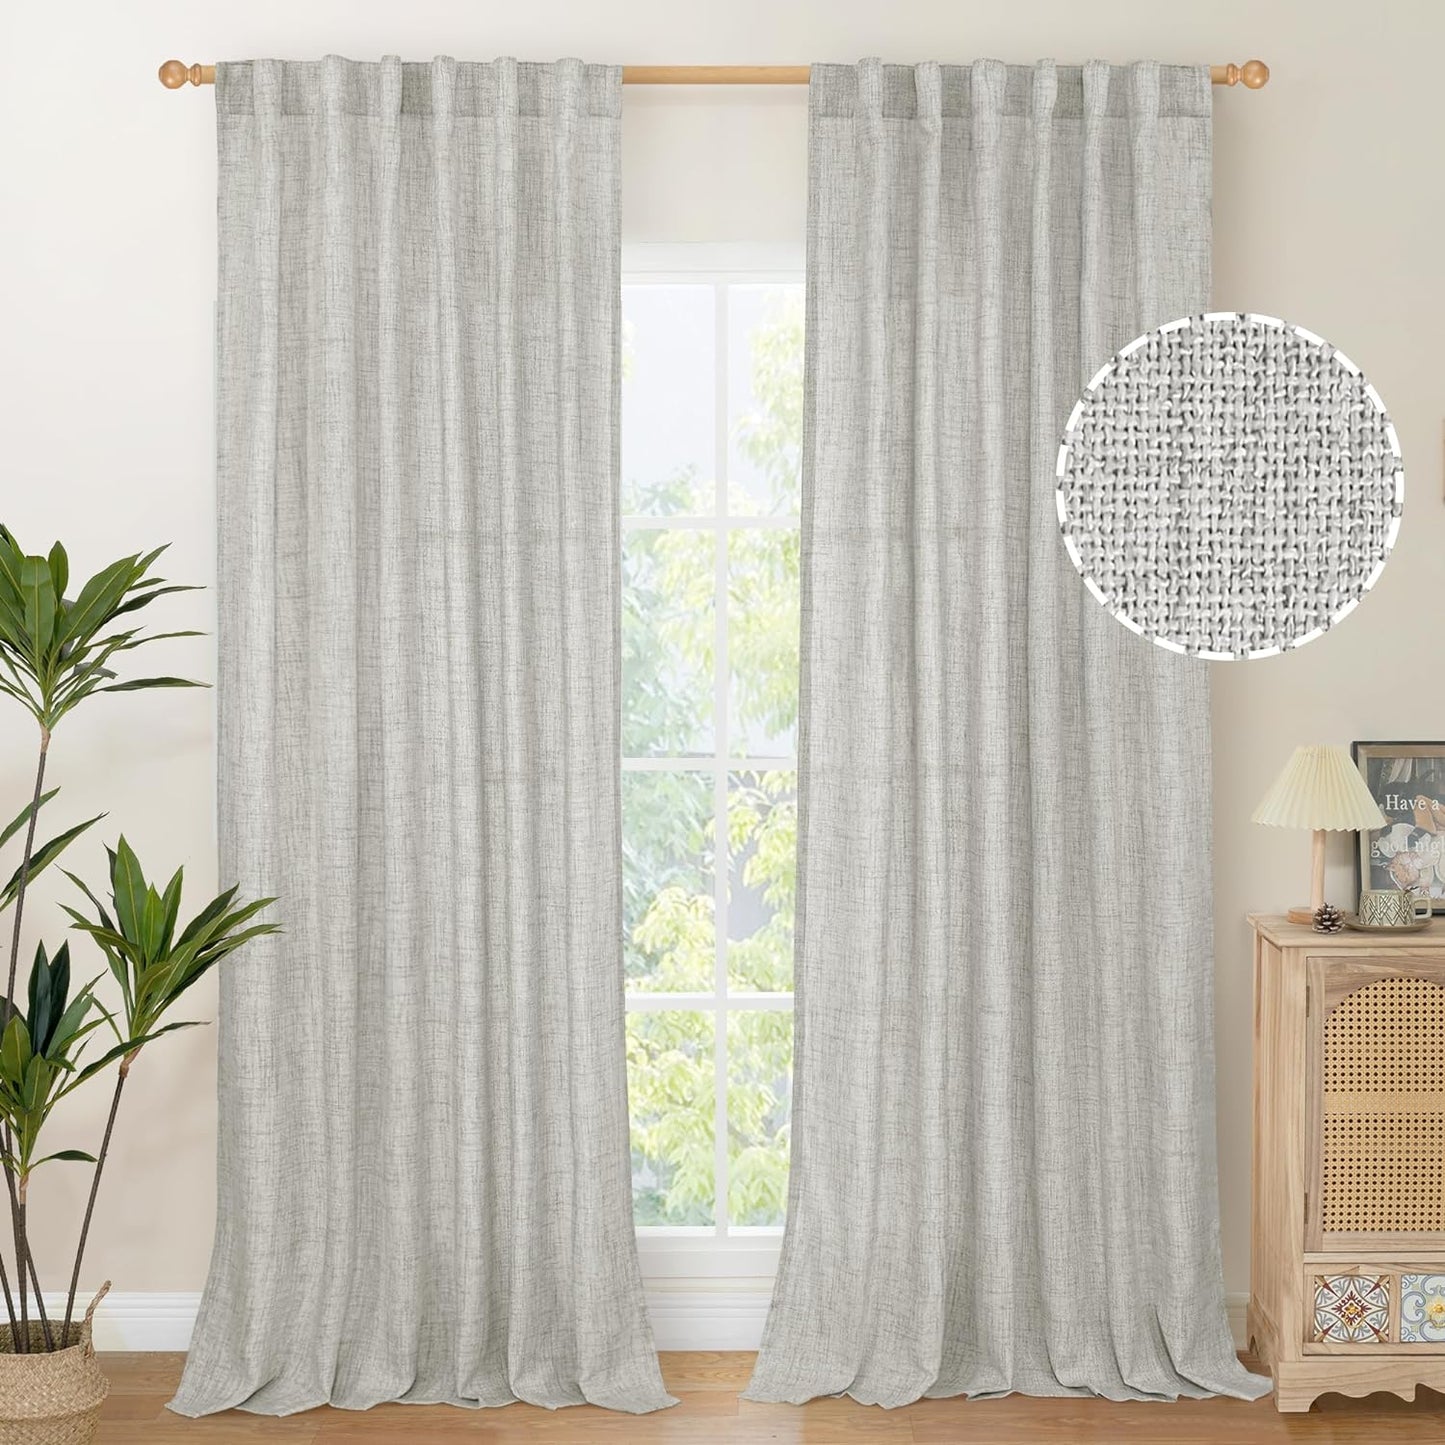 Youngstex Natural Linen Curtains 72 Inch Length 2 Panels for Living Room Light Filtering Textured Window Drapes for Bedroom Dining Office Back Tab Rod Pocket, 52 X 72 Inch  YoungsTex Light Grey 52W X 95L 